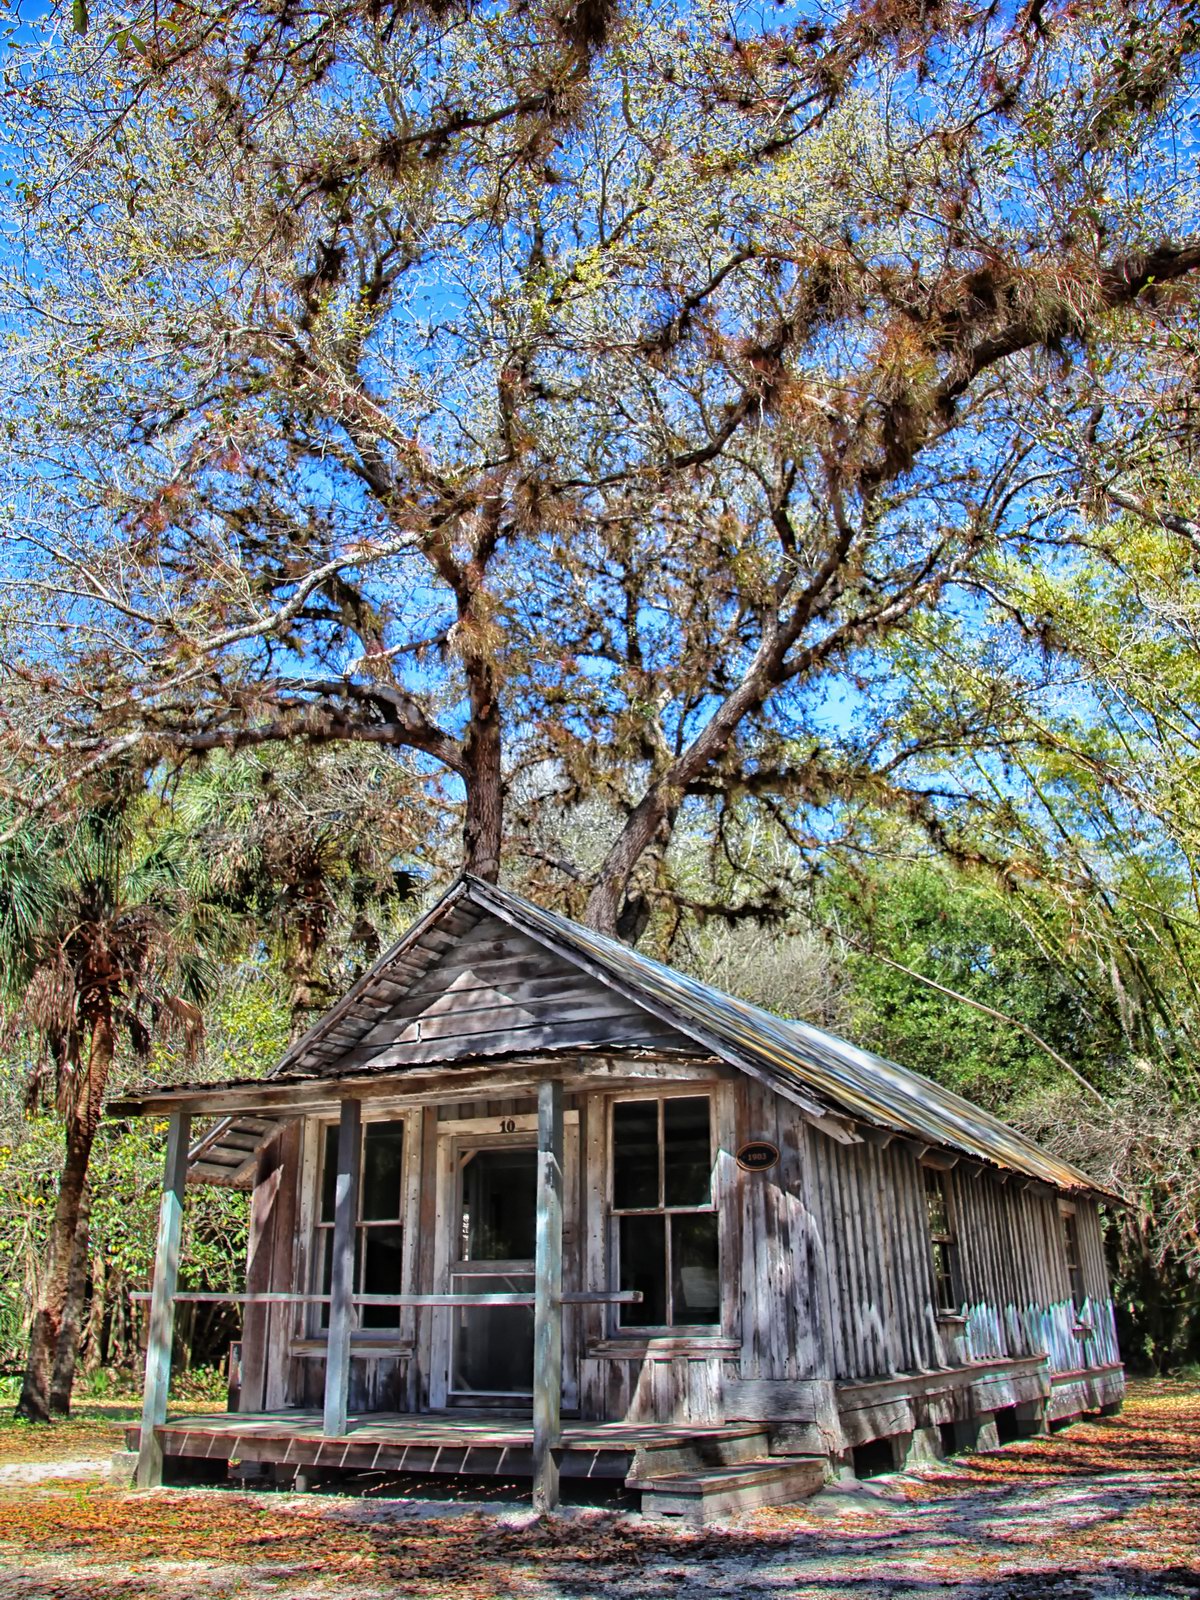 Located within Koreshan State Park is the Memebership Cottage. This old building and landscape shadow a long gone community along...